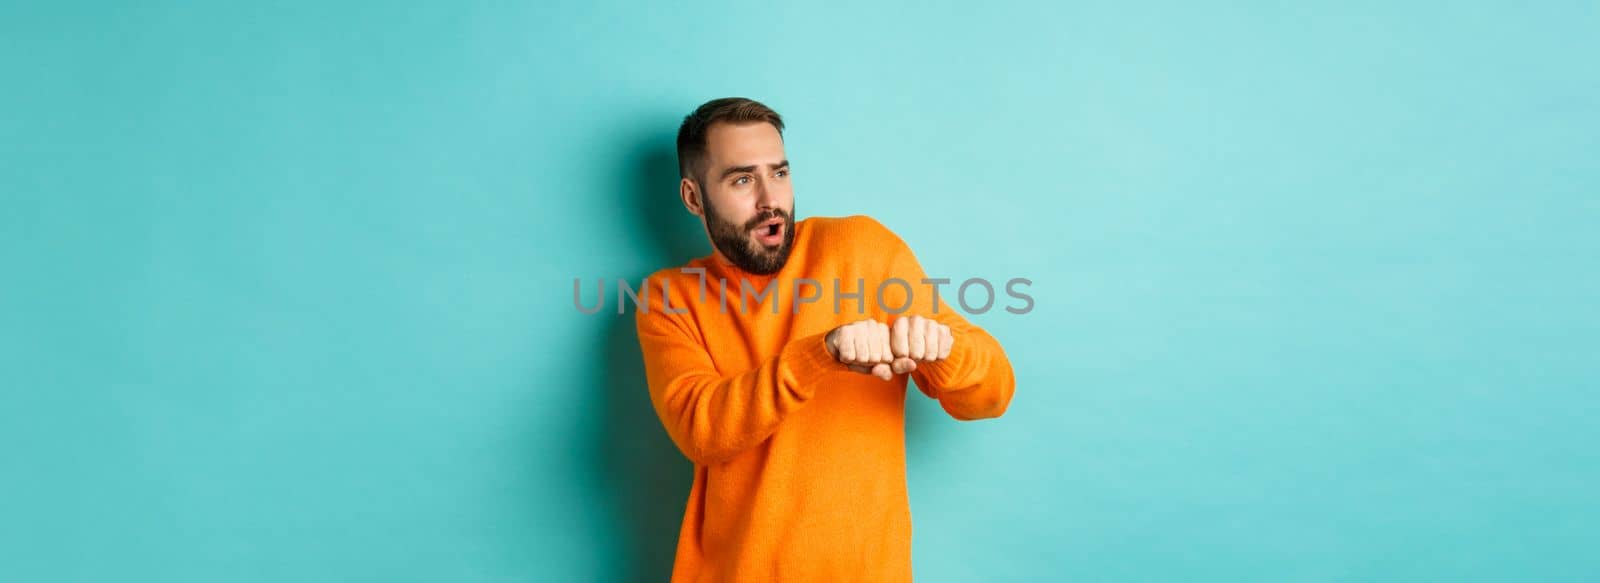 Happy young man do champion dance, celebrating victory or success, light blue background.